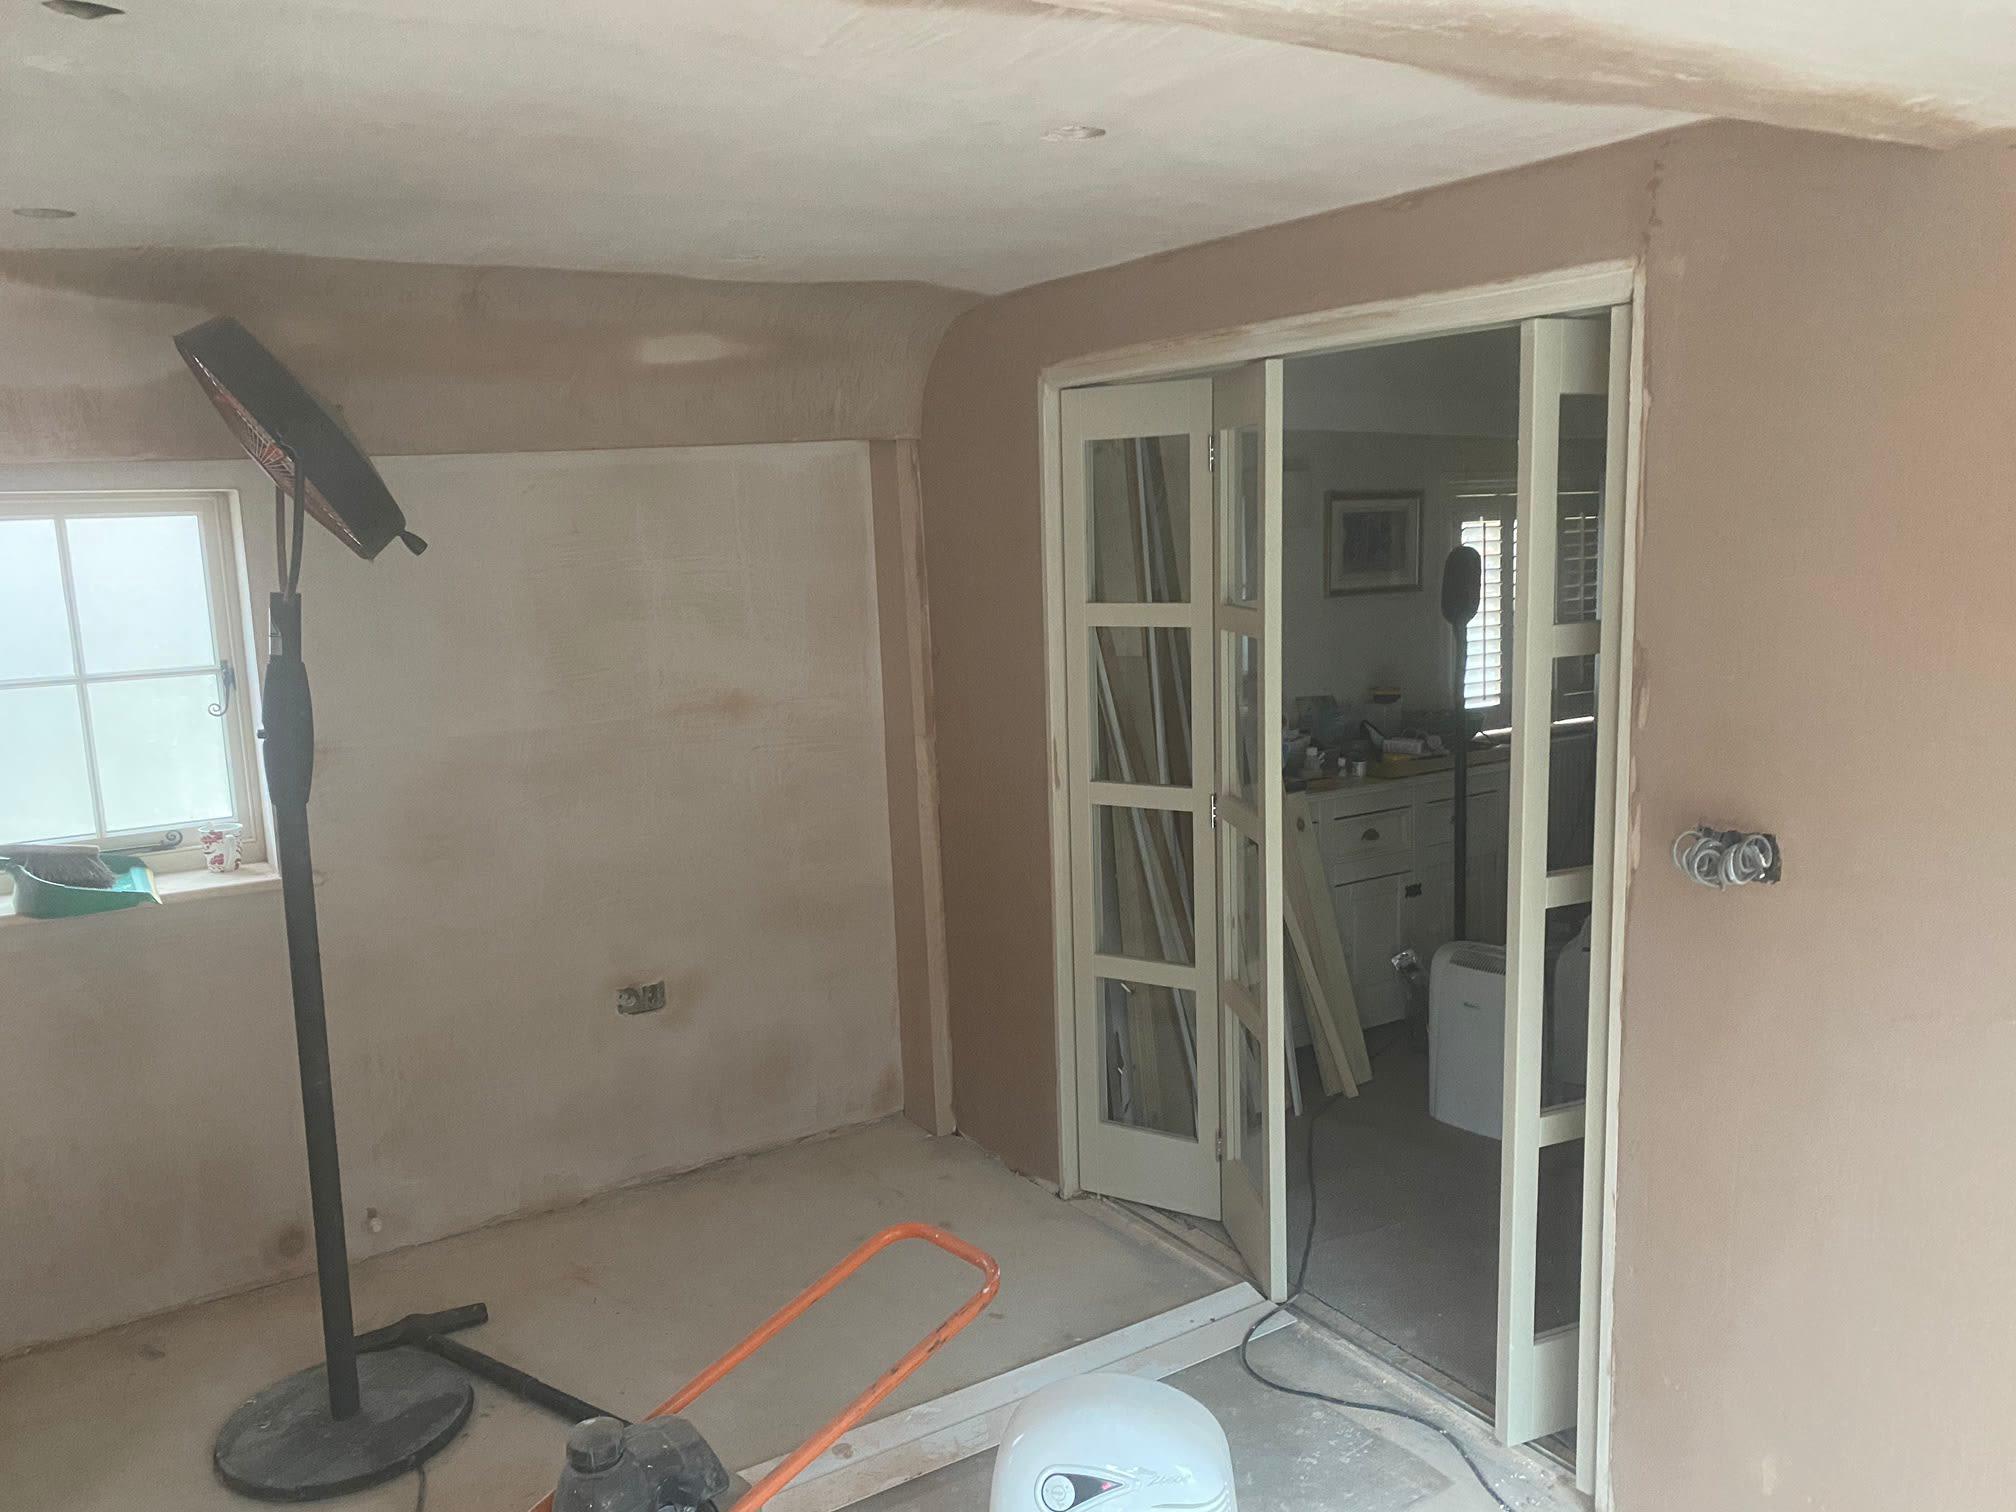 Images A B Plastering